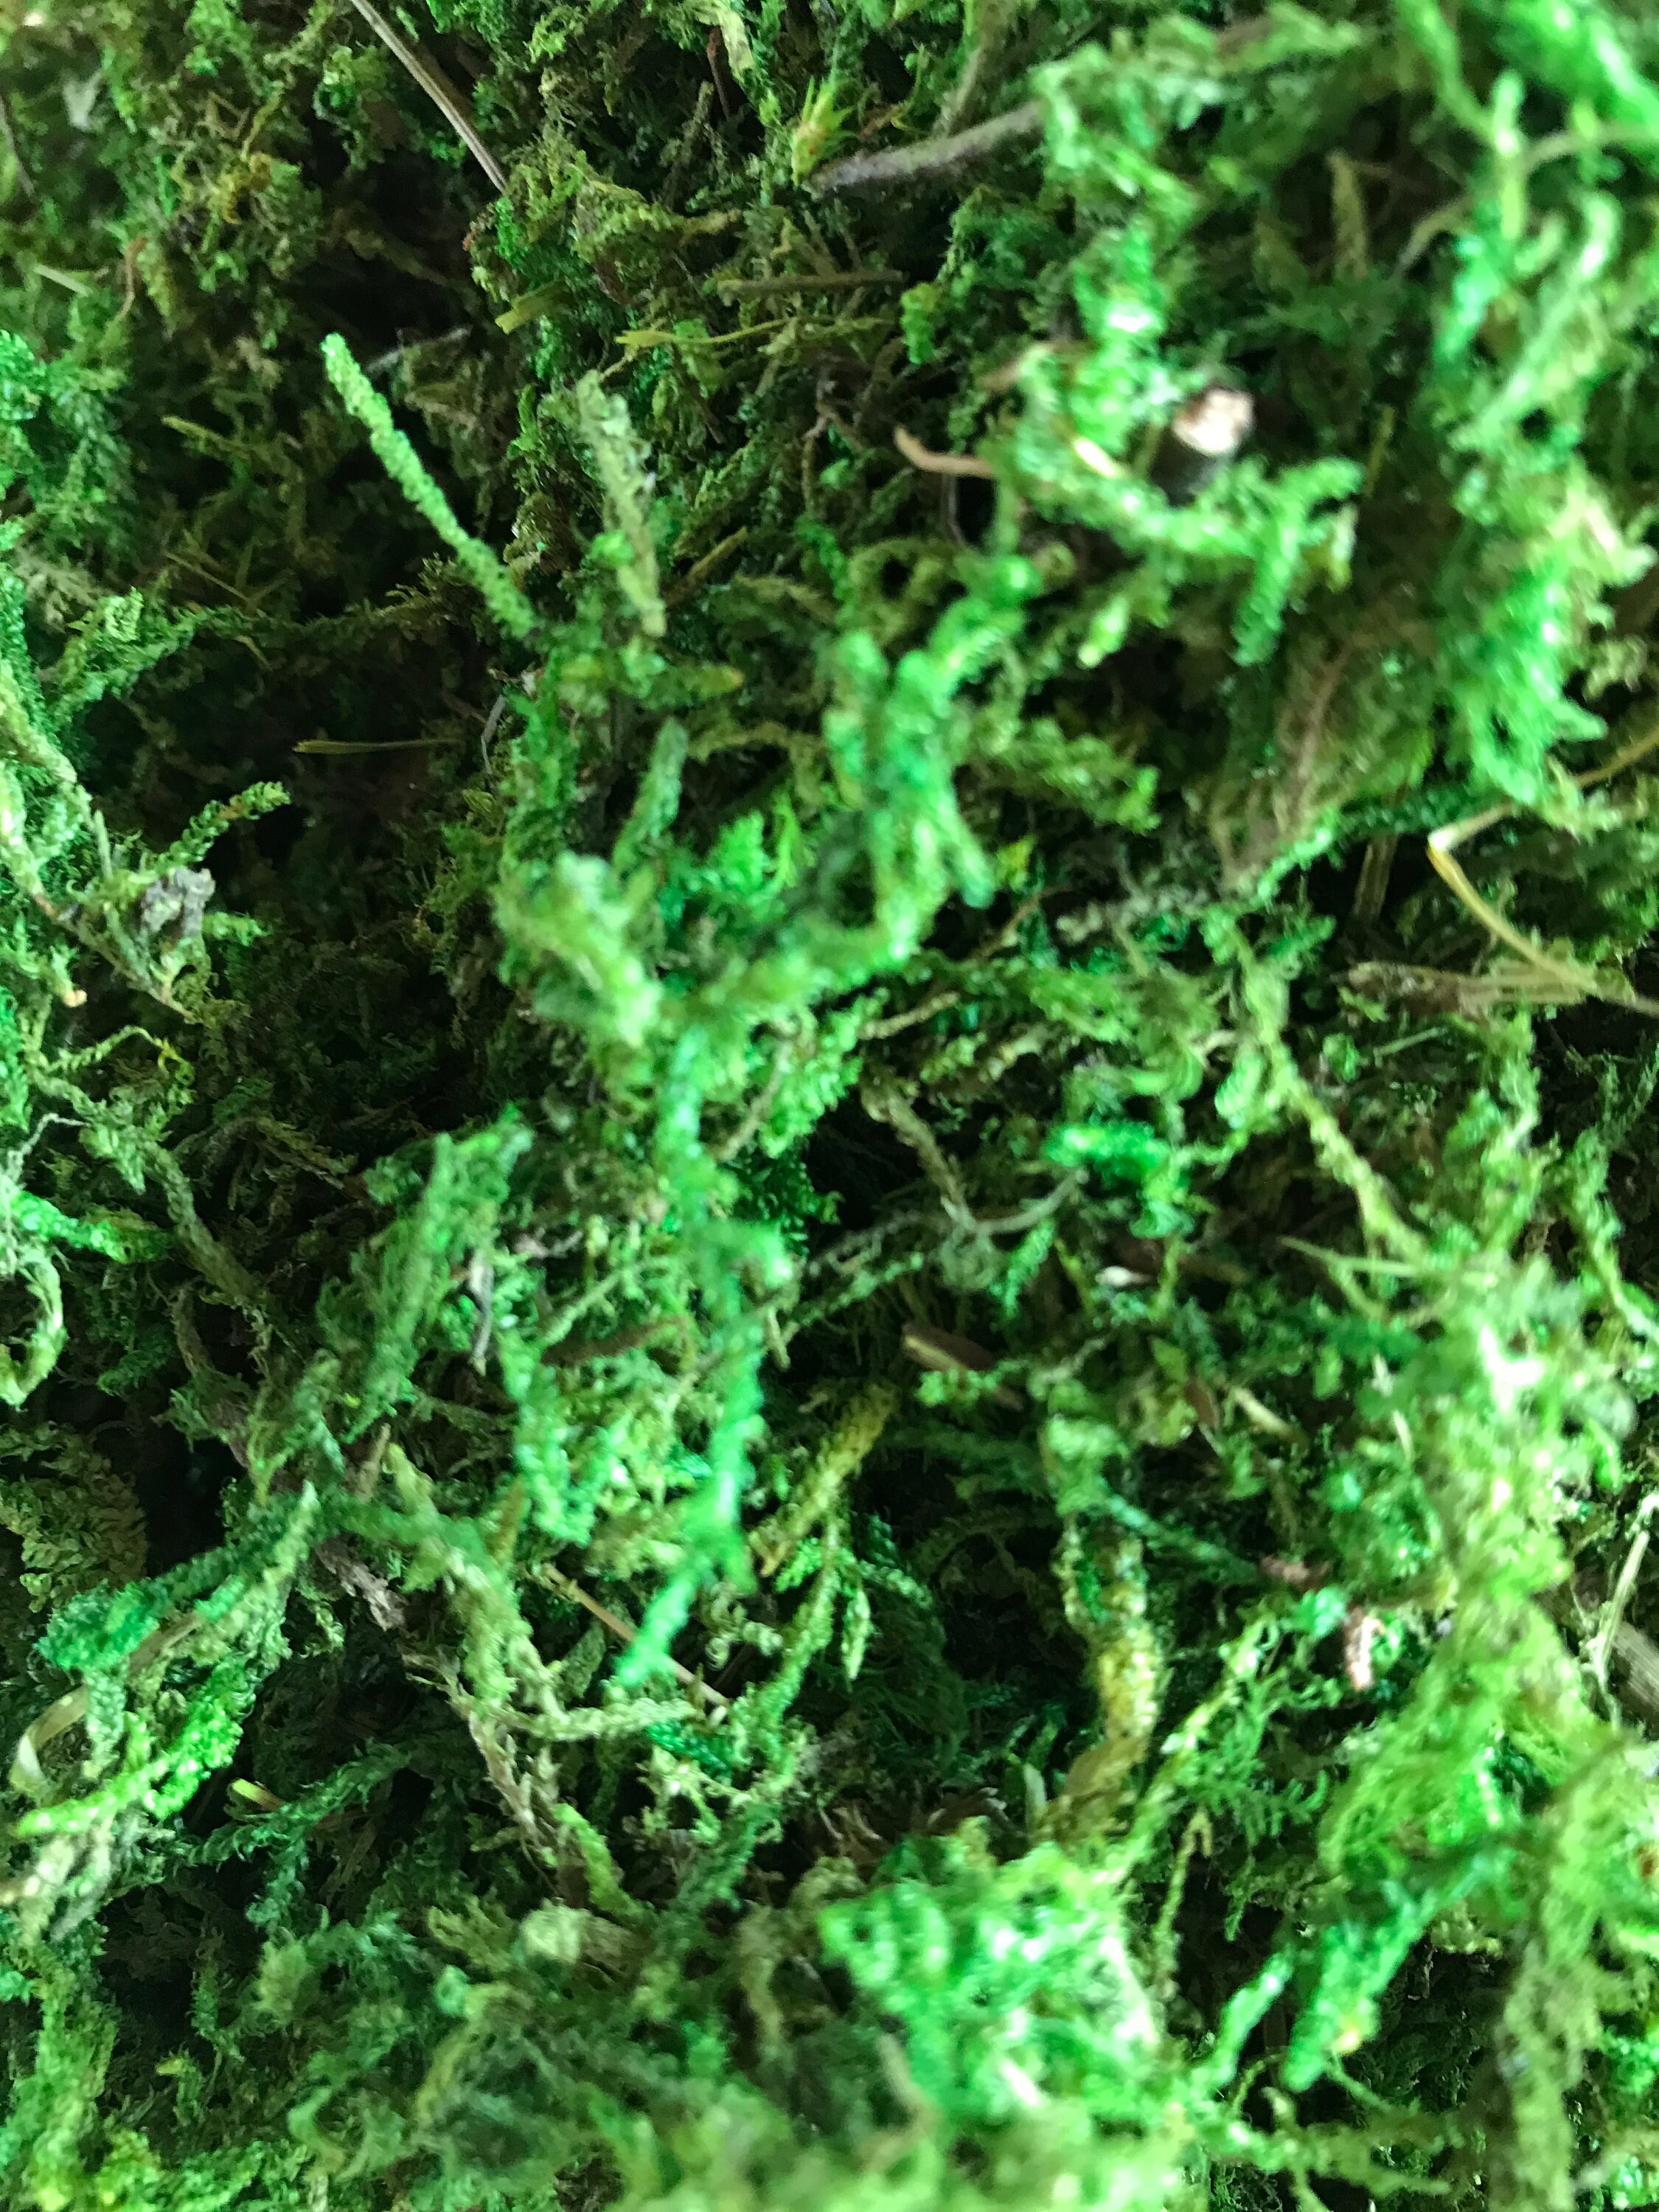 SPHAGNUM MOSS - Have you heard of it? I've been using it for a few